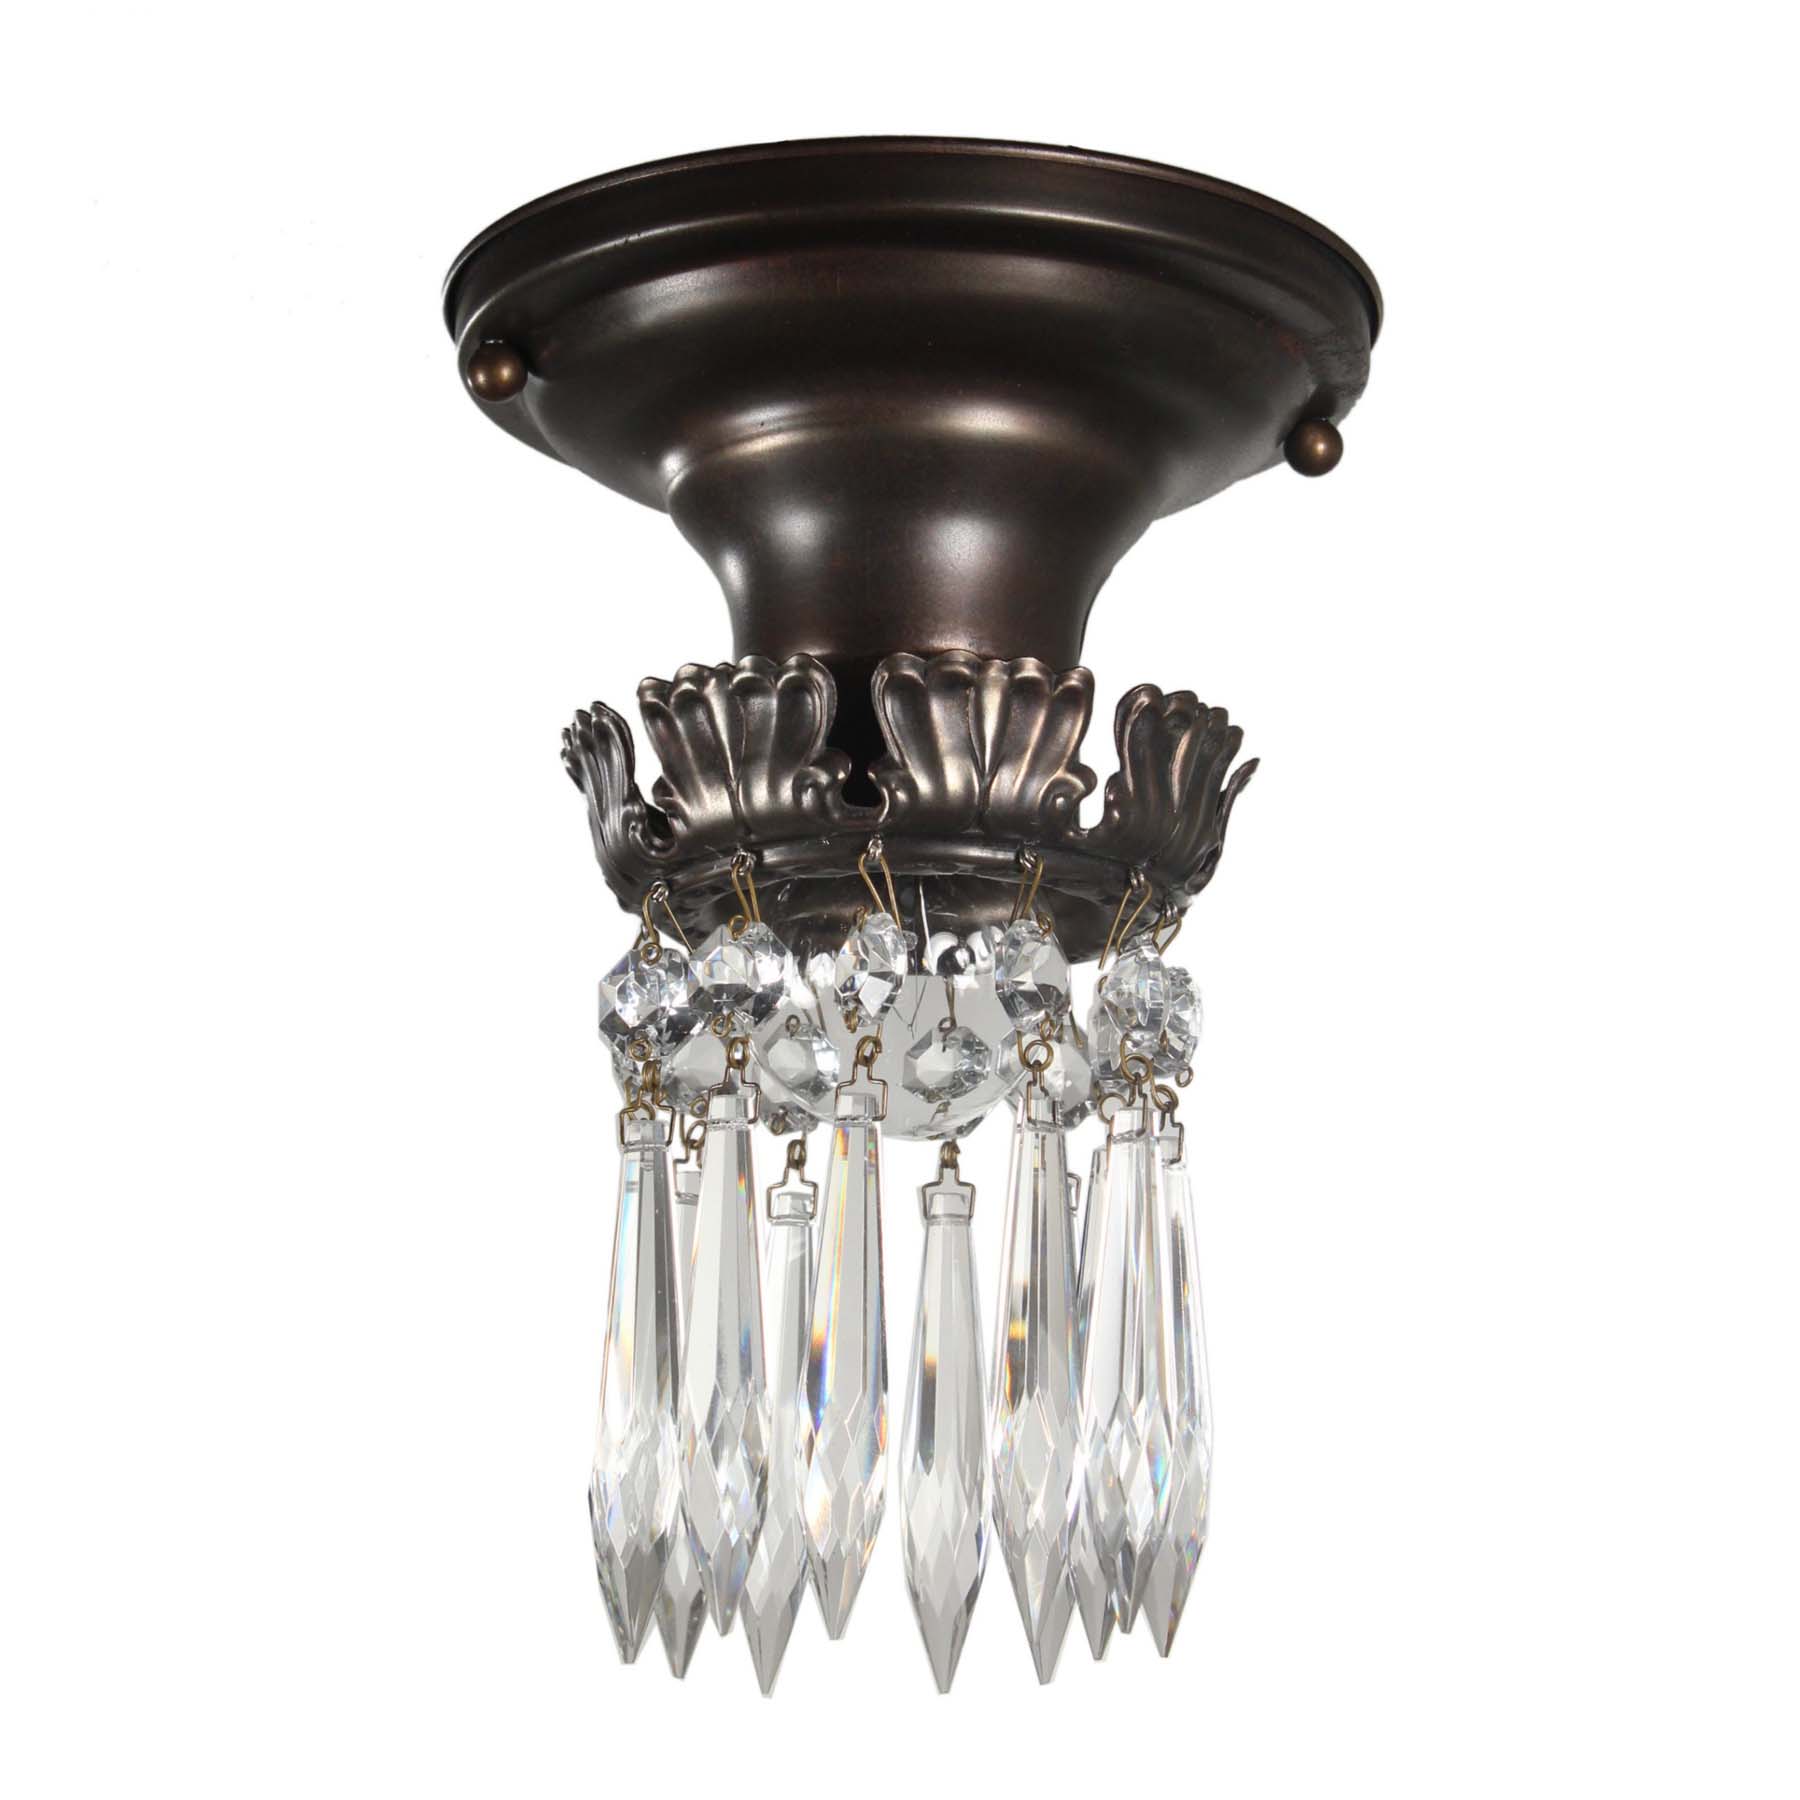 Flush-Mount Lights with Exposed Bulbs and Prisms, Antique Lighting-0